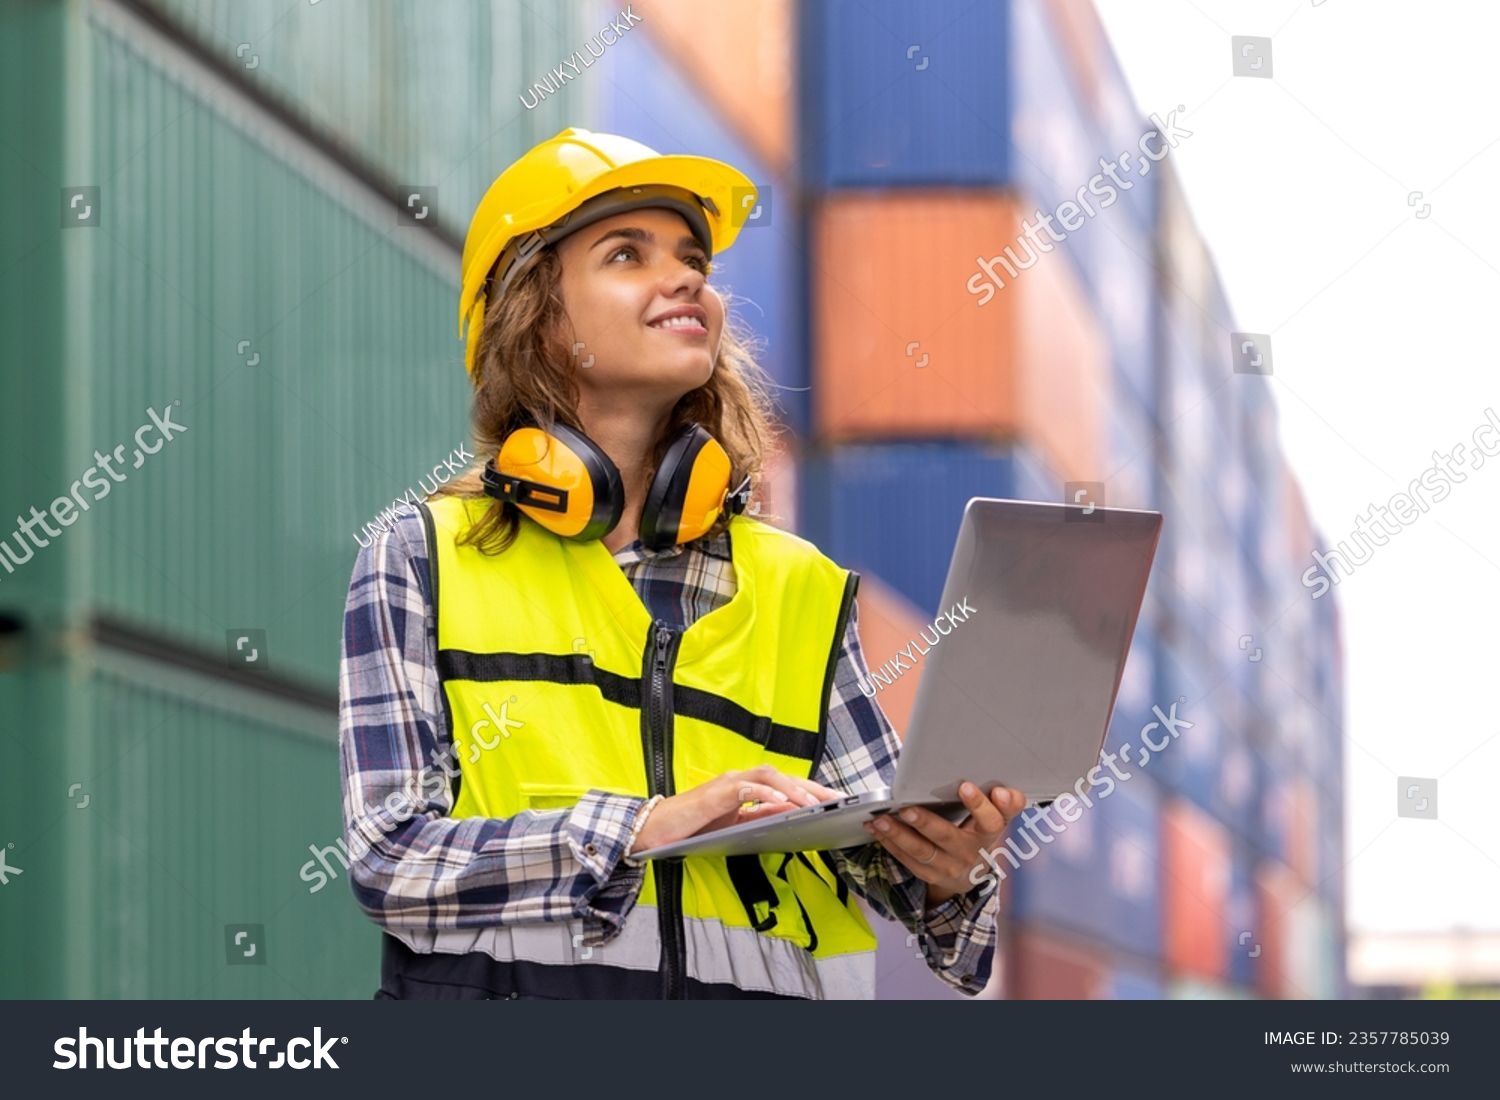 Portrait of caucasian female engineer in container yard, International import export and logistic business concept. Logistics, transportation, distribution concept. Factory, warehouse, worker. #2357785039